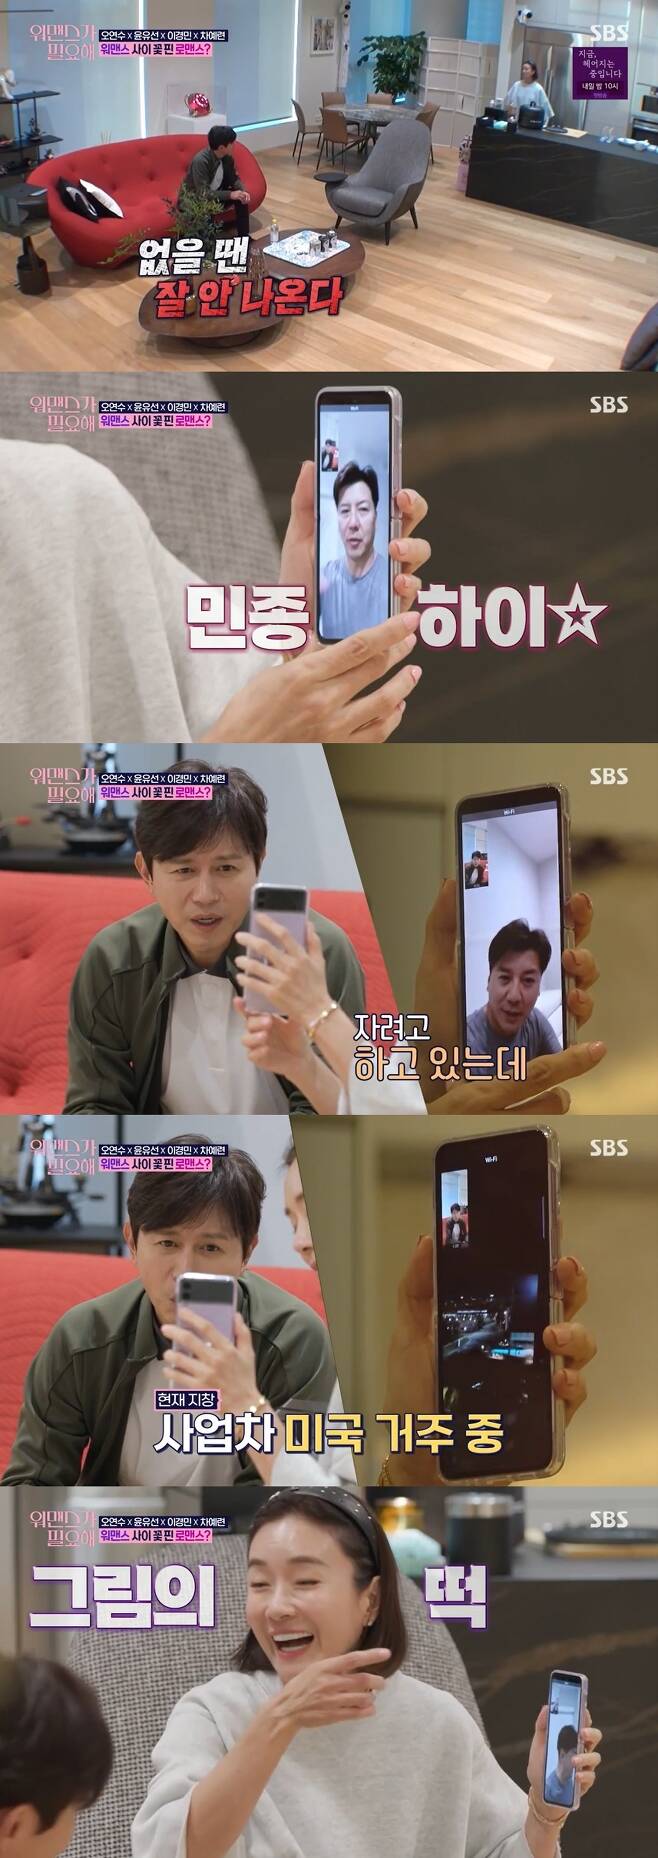 Seoul =) = Son Ji Chang made a surprise appearance in I need a manOh Yeon-soo invited his fellow actor and 30-year-old best friend Kim Min-jong to his home in the SBS entertainment program I need a woman broadcasted on the afternoon of the 11th.Kim Min-jong mentioned Oh Yeon-soo husband Son Ji Chang and said, I do not say that I am a sister because I do not have a brother.Oh Yeon-soo made a video call to Son Ji Chang, who was given in comfortable clothes.Kim Min-jong asked, What did you do not sleep? Son Ji Chang said, Im trying to sleep.Kim Min-jong asked, Is that a new house from United States of America?Son Ji Chang is currently living in United States of America, a business car; Son Ji Chang showed the interior of the house on a cell phone screen.I can see the pool here, he said, drawing attention.But soon, Its a hotel pool next to my house. Oh Yeon-soo laughed, saying, Its not ours, its next to us.Kim Min-jong then worried about Son Ji Chang, saying, I have to eat well there. Son Ji Chang said he would understand and gave him a warm heart.Meanwhile, the womens relationship reality, which observes what synergy happens when women who need a woman are united in more than one team, not Alone. It is broadcast every Thursday at 9 pm.